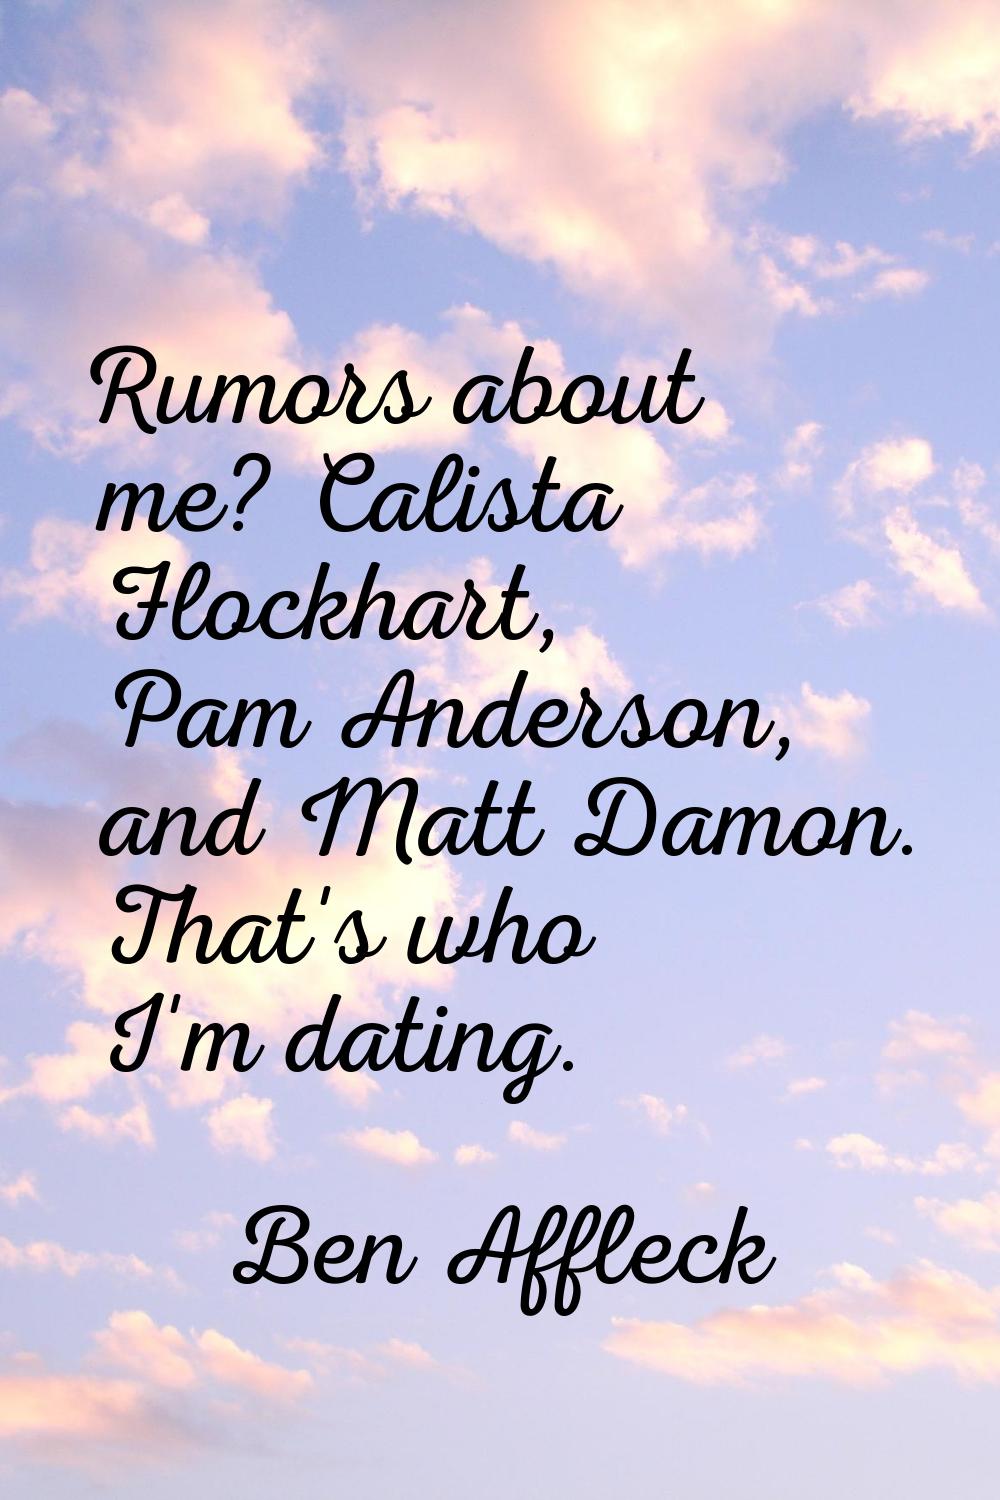 Rumors about me? Calista Flockhart, Pam Anderson, and Matt Damon. That's who I'm dating.